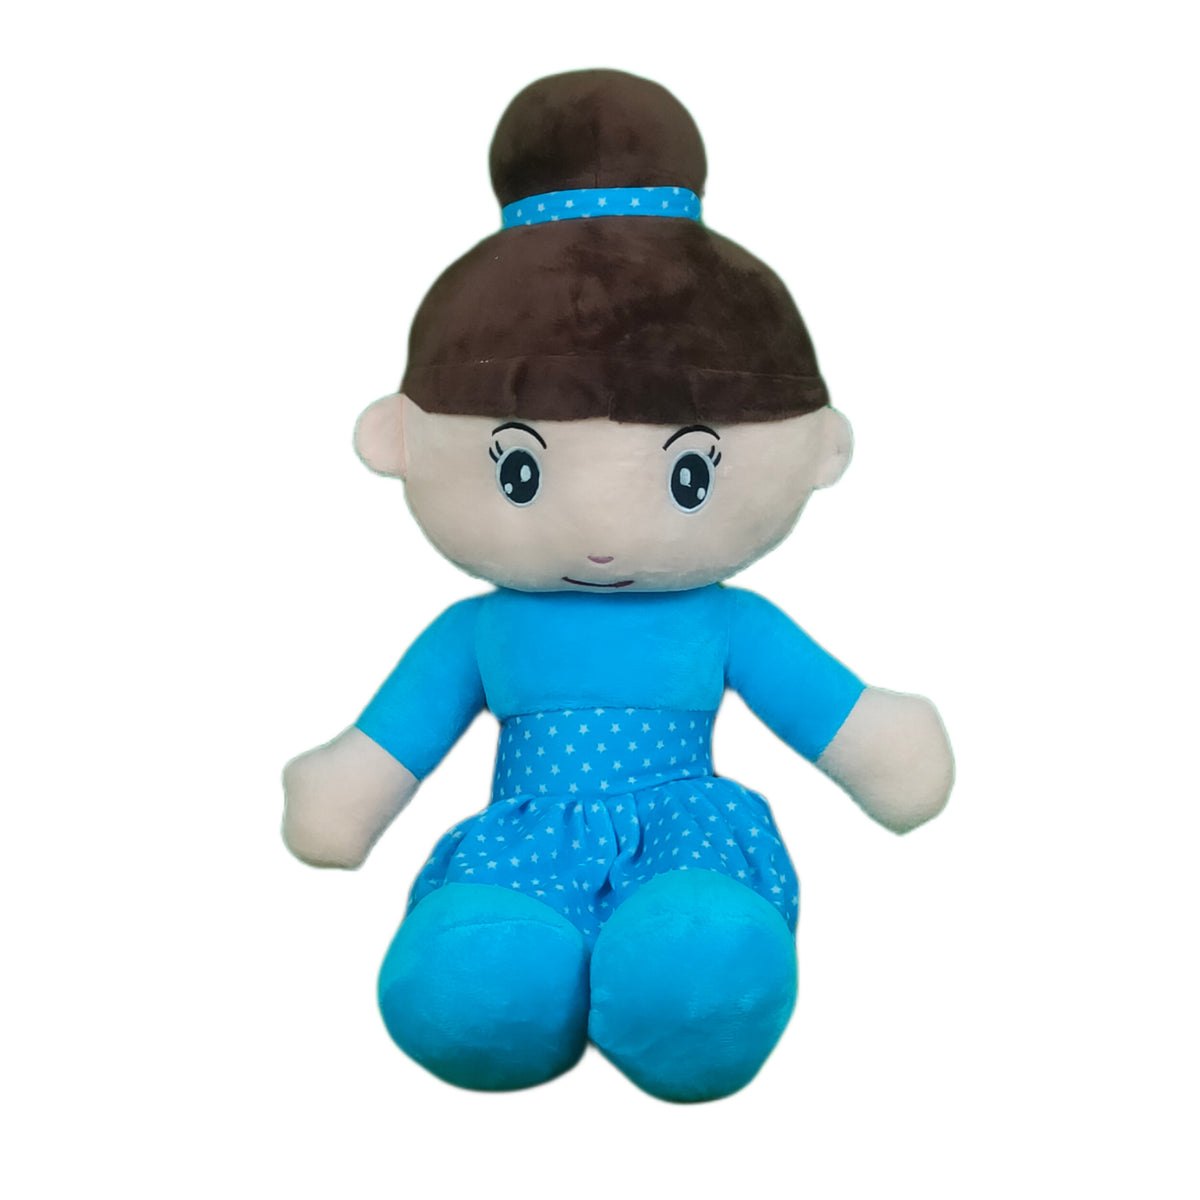 Play Hour Bella Rag Doll Plush Soft Toy Wearing Sky Polka Dot Frock for Ages 3 Years and Up, 65cm